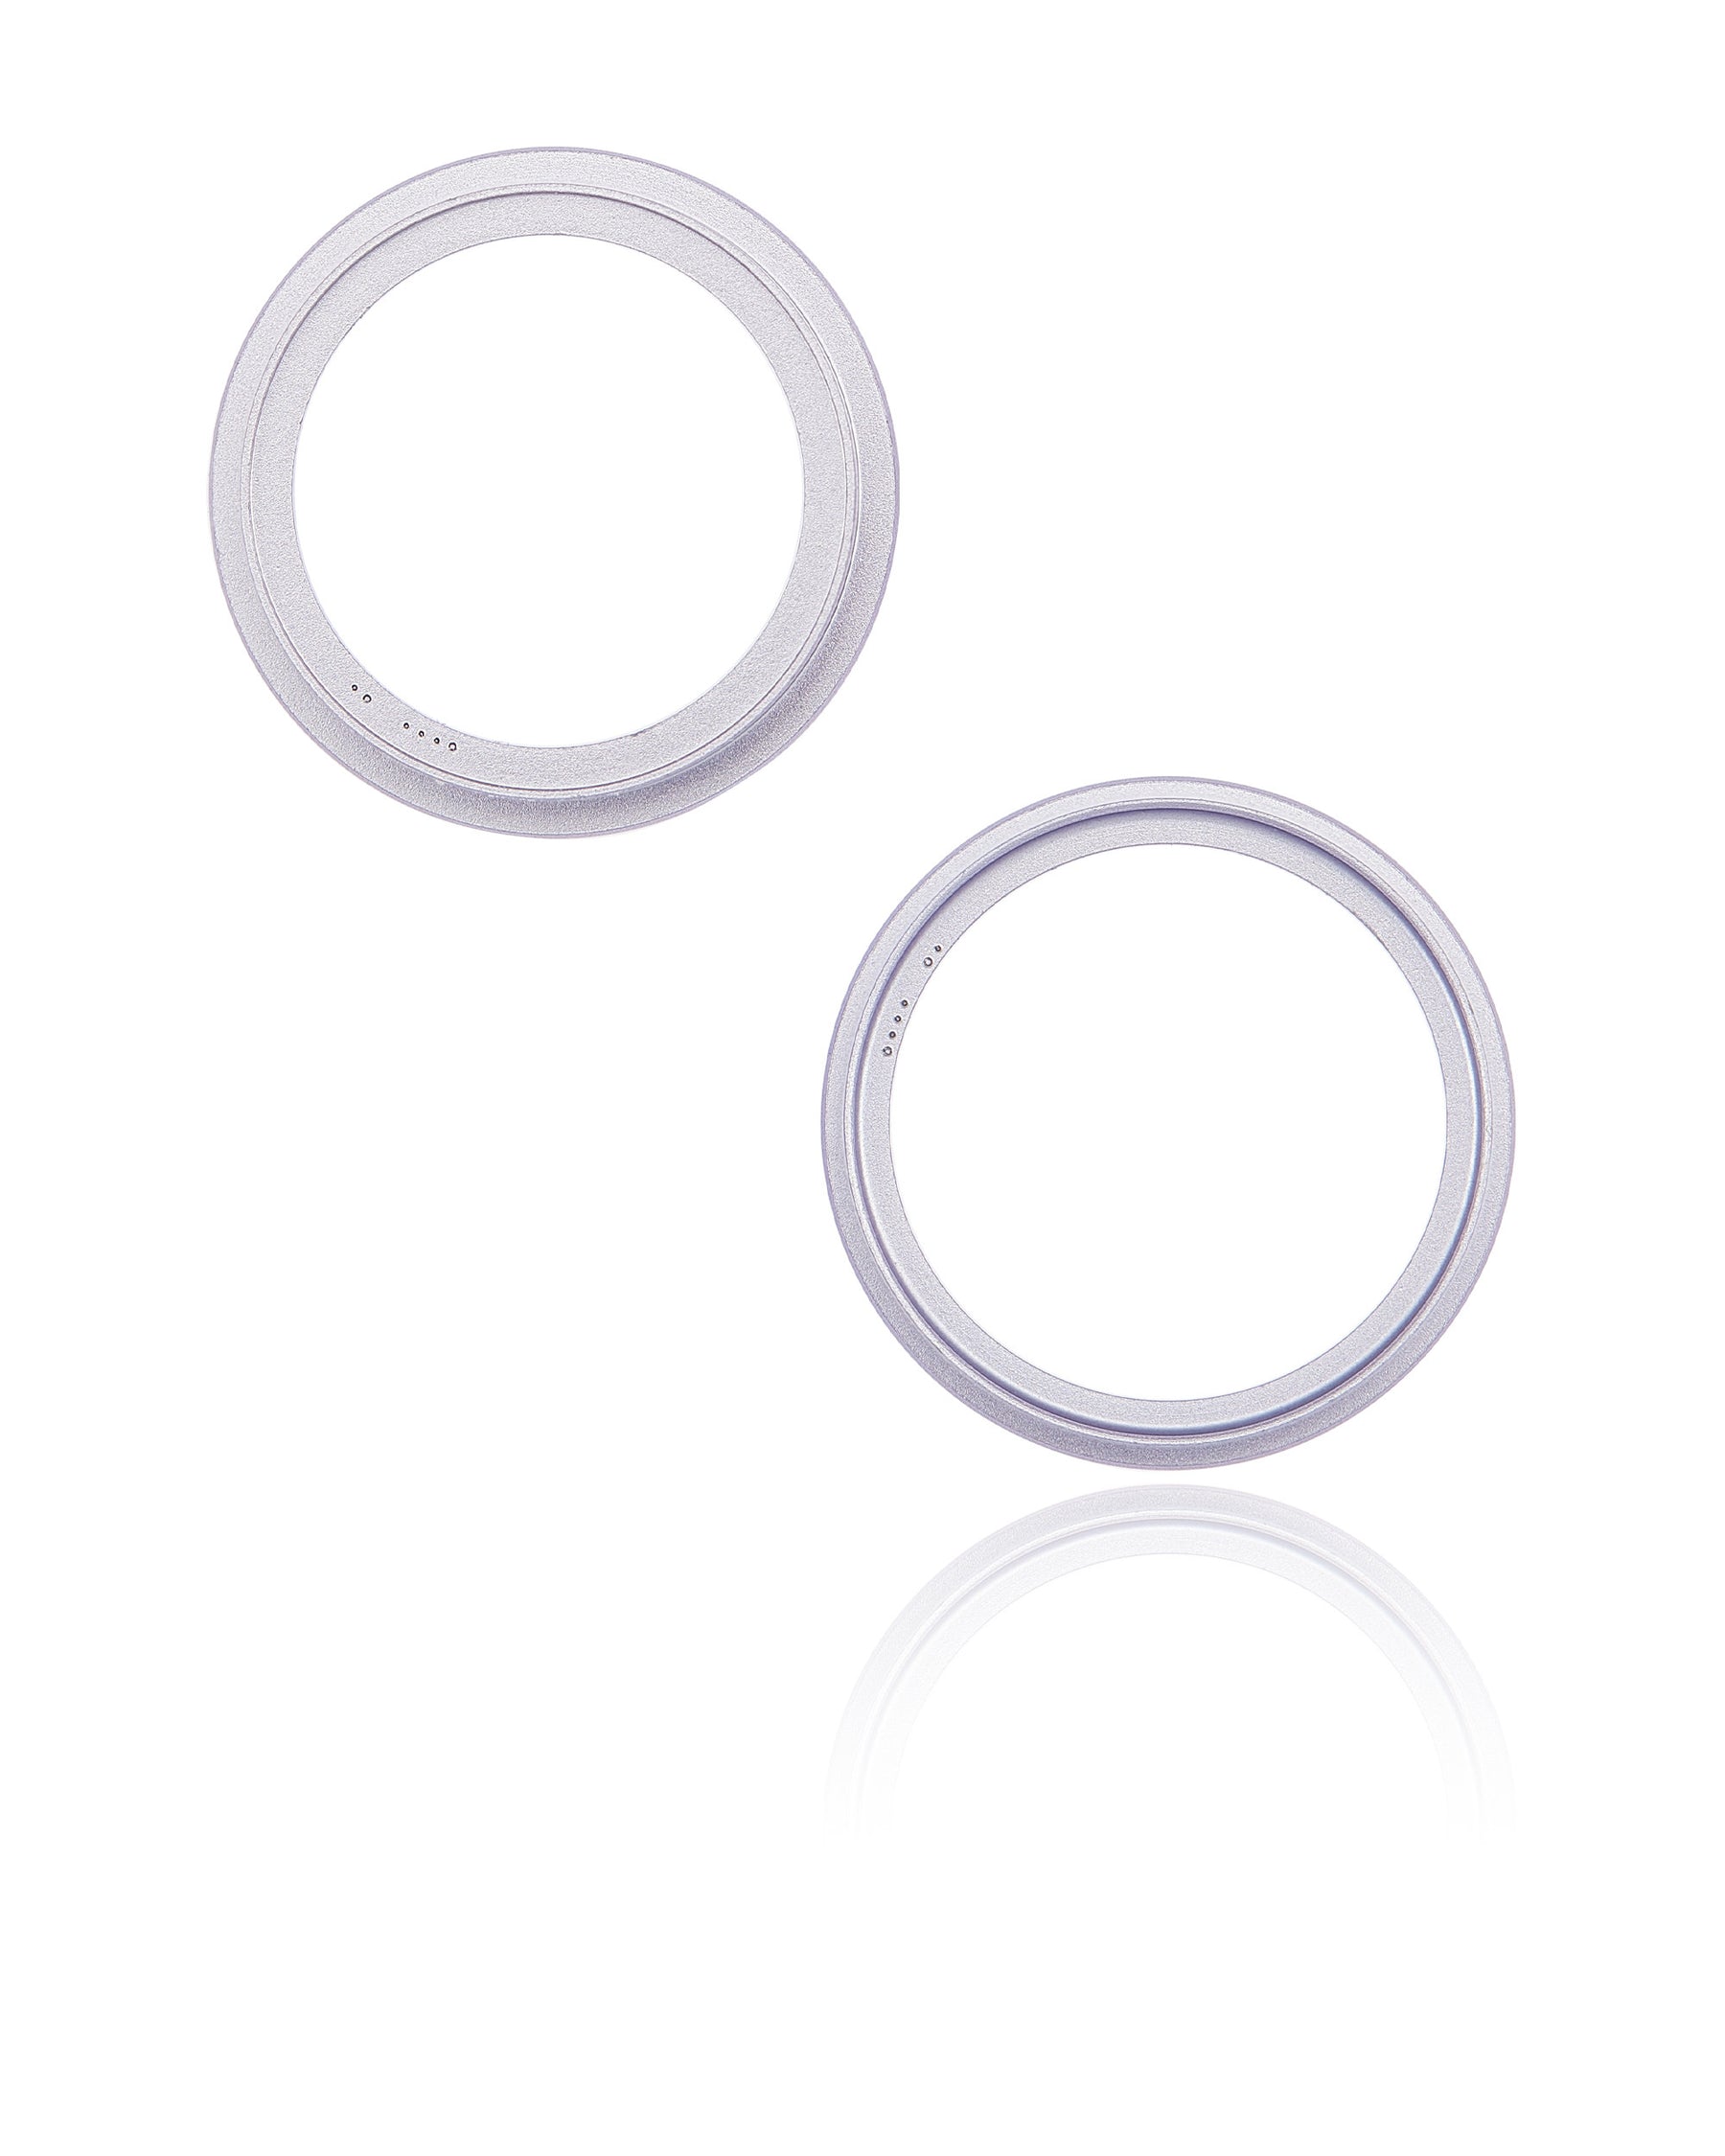 PURPLE BACK CAMERA BEZEL RING ONLY (2 PIECE SET) COMPATIBLE FOR IPHONE 14 / 14 PLUS